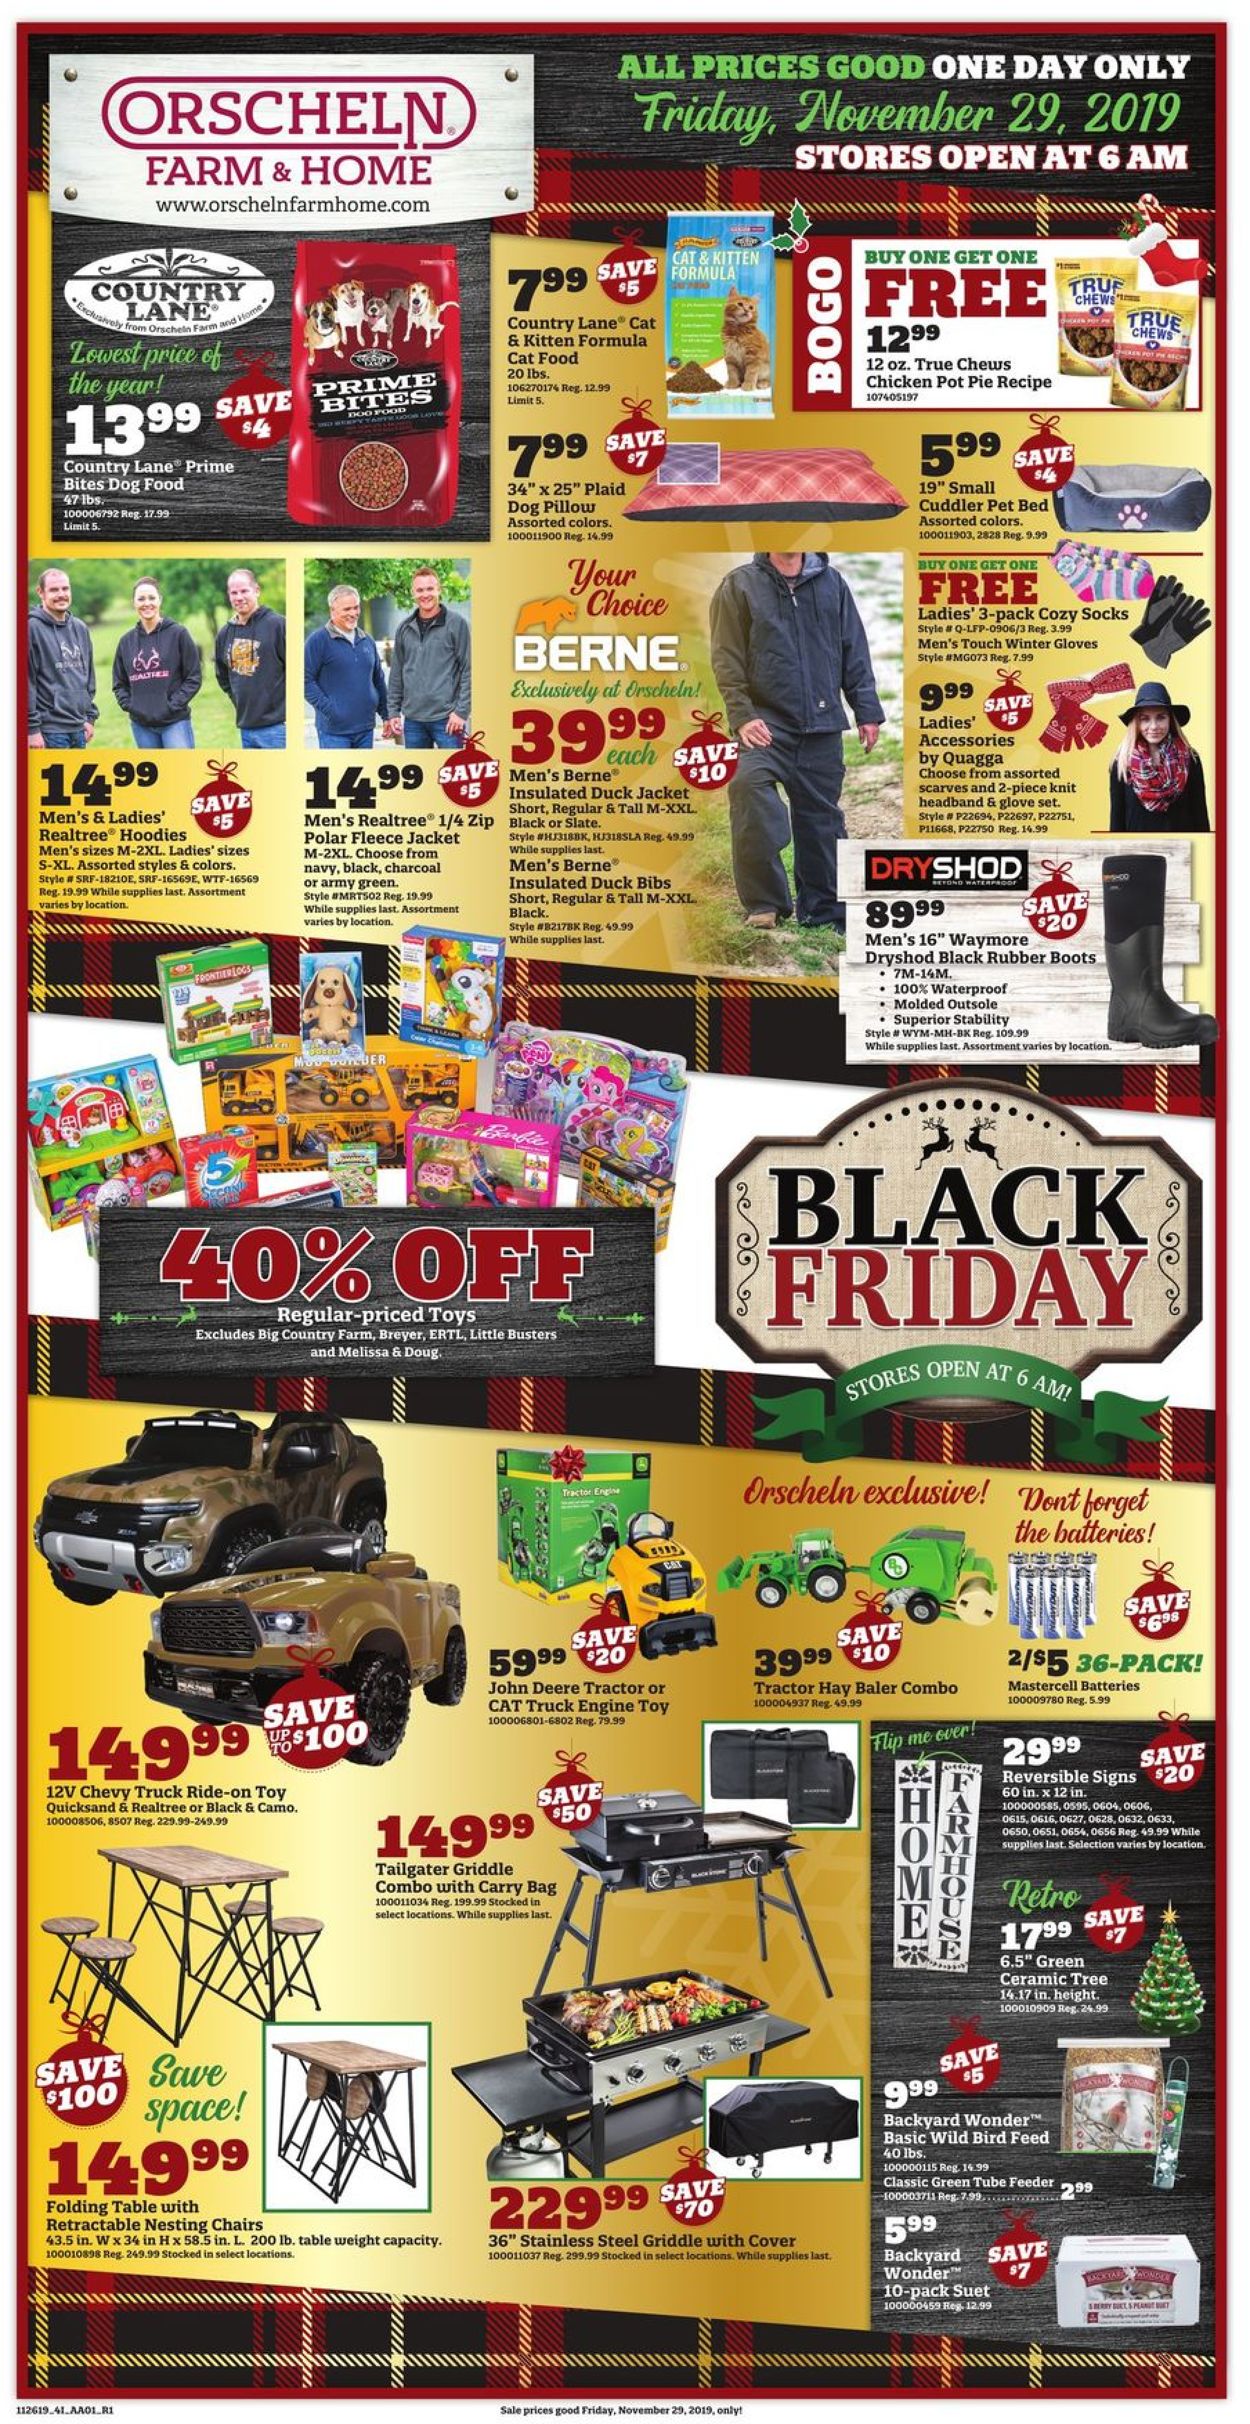 Orscheln Farm and Home - Black Friday Ad 2019 Weekly Ad Circular - valid 11/26-12/01/2019 (Page 4)